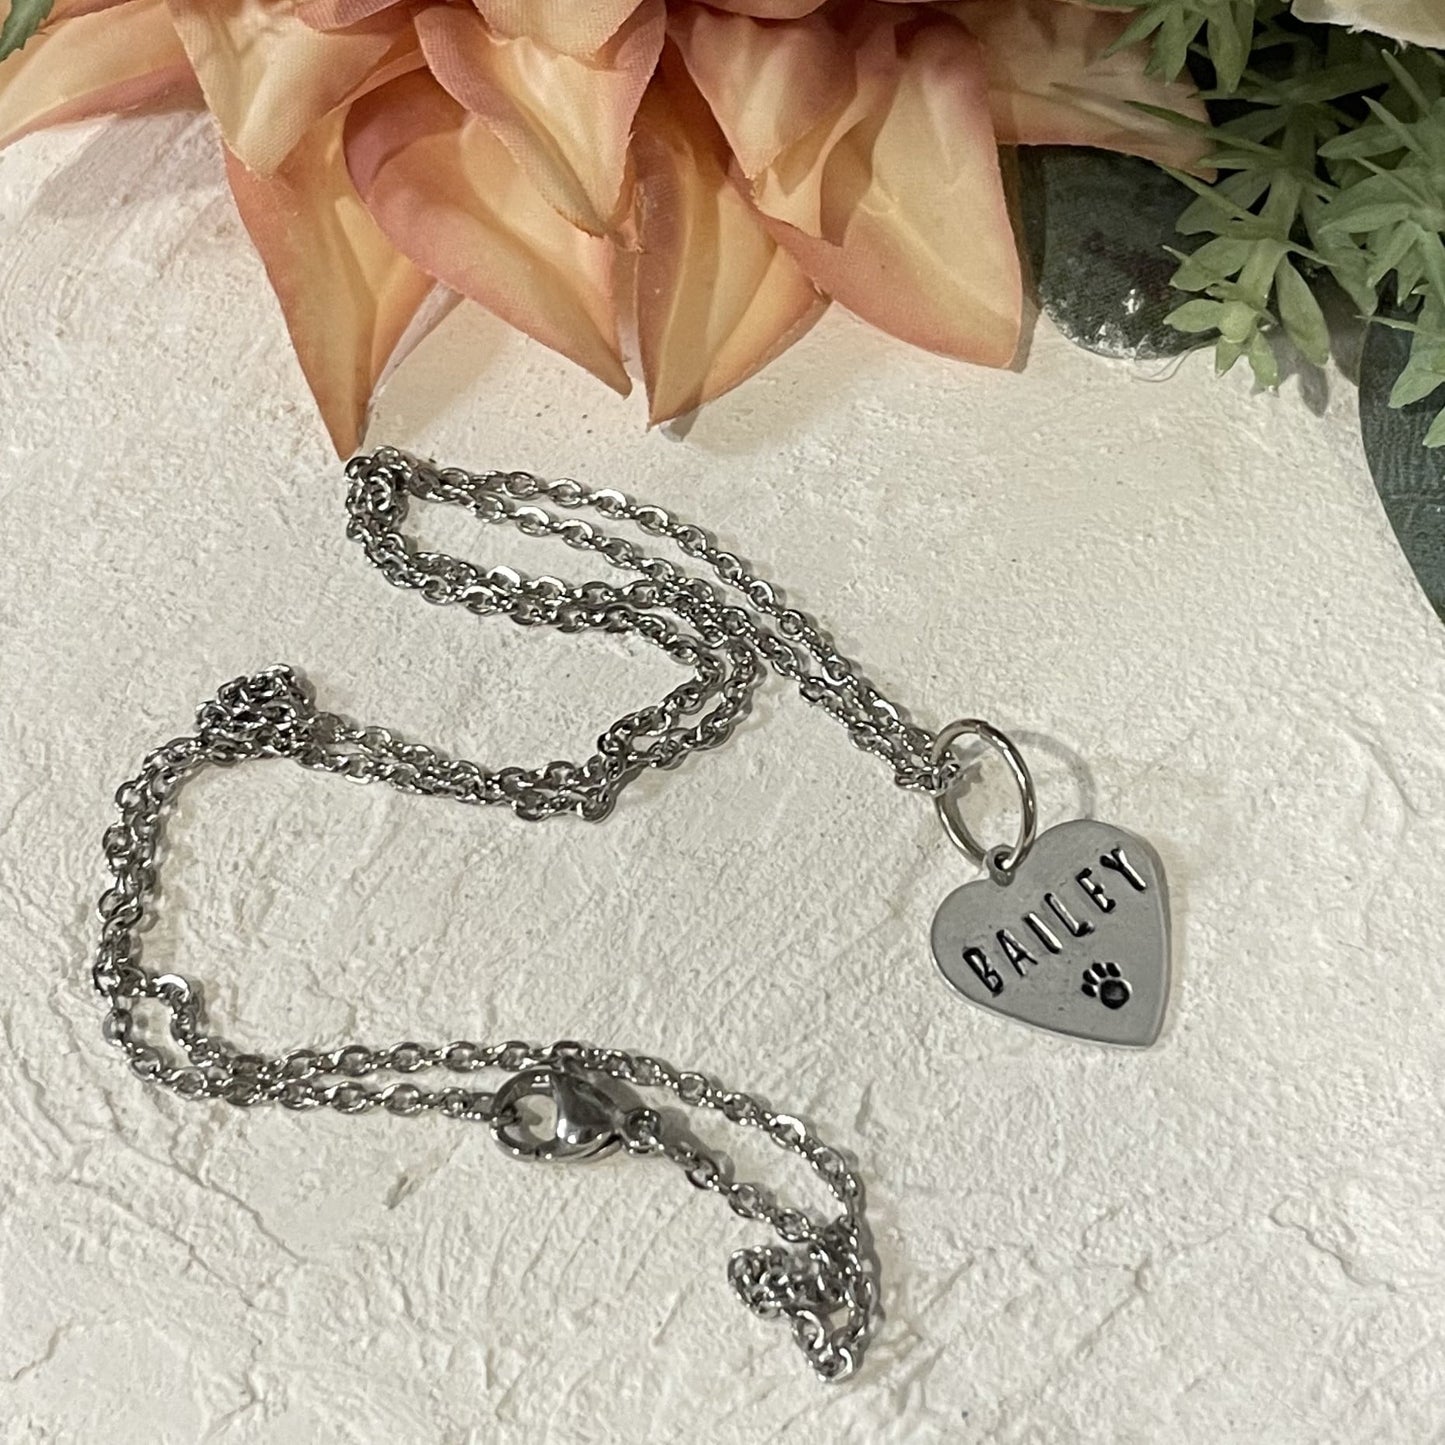 Metal hand-stamped bouquet pendant charm hanging on silver necklace chain, displaying the name Bailey.